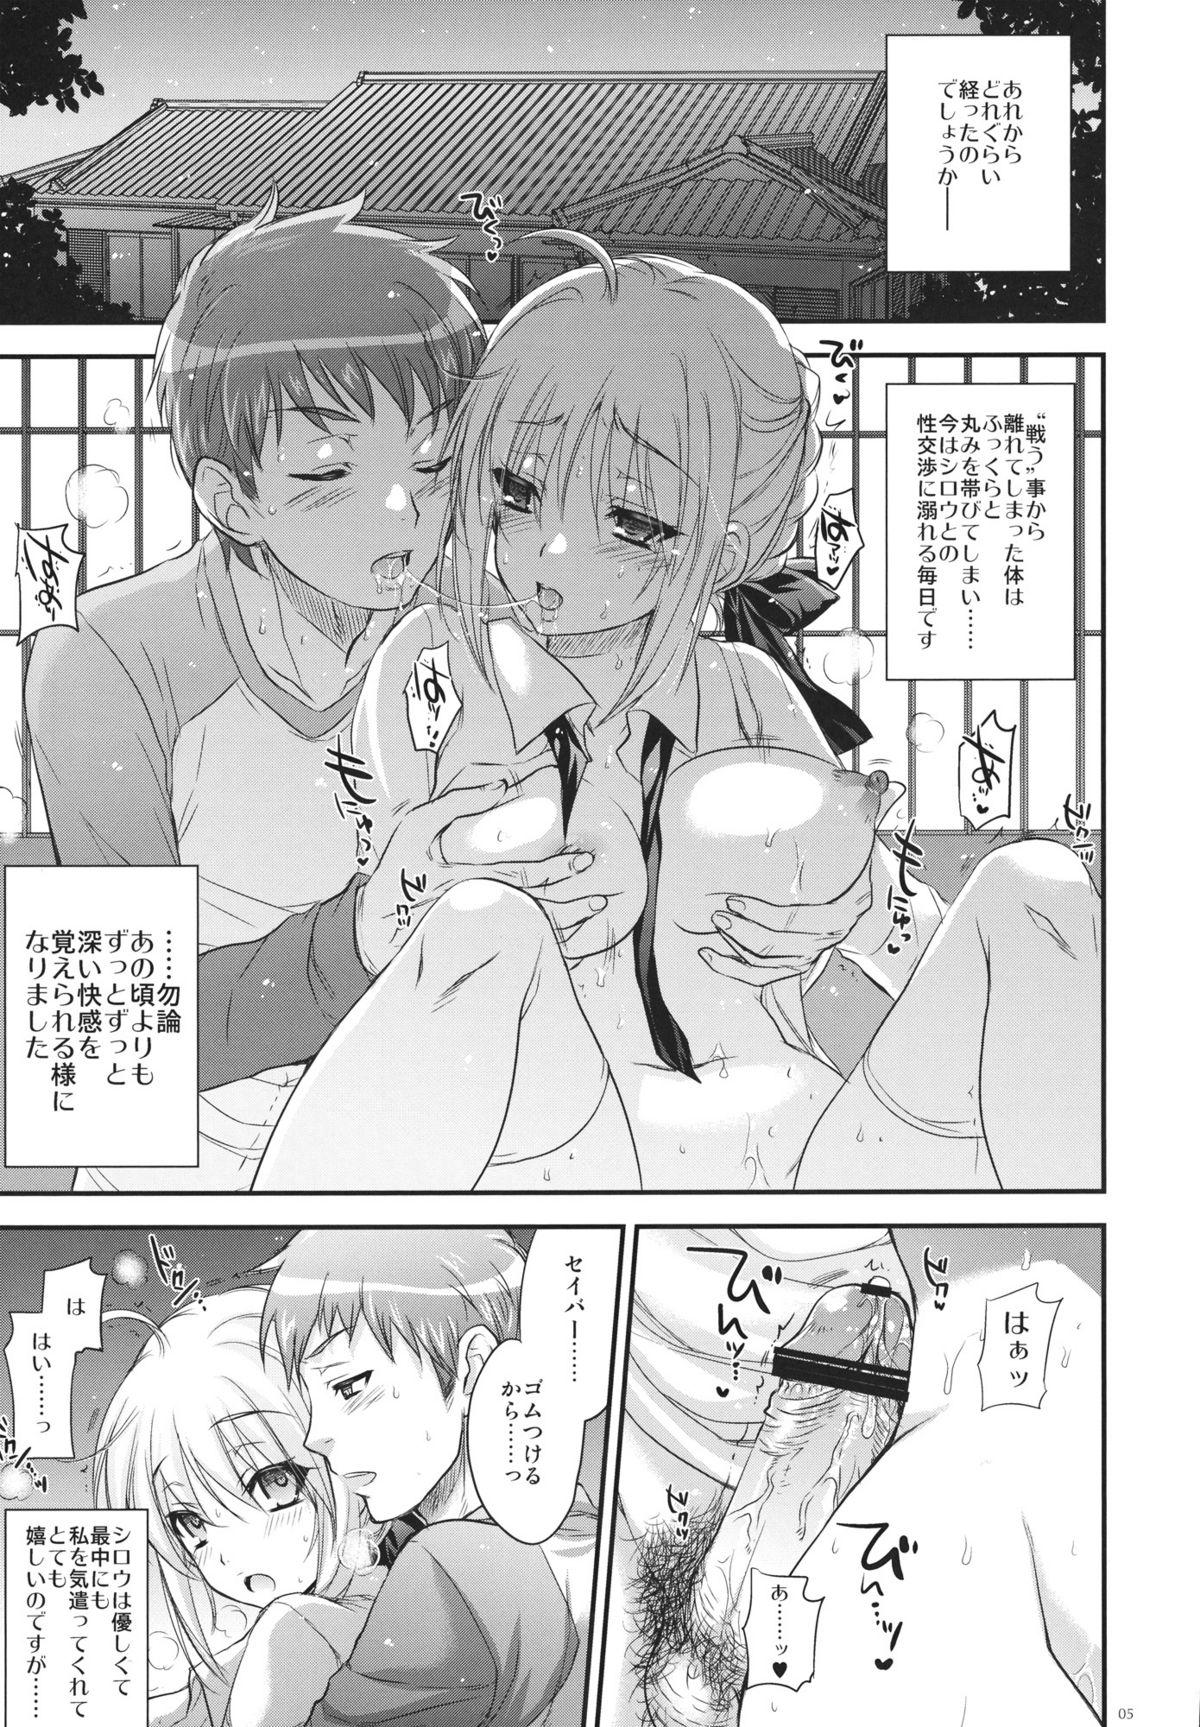 Moaning GARIGARI 38 - Fate stay night Whore - Page 4